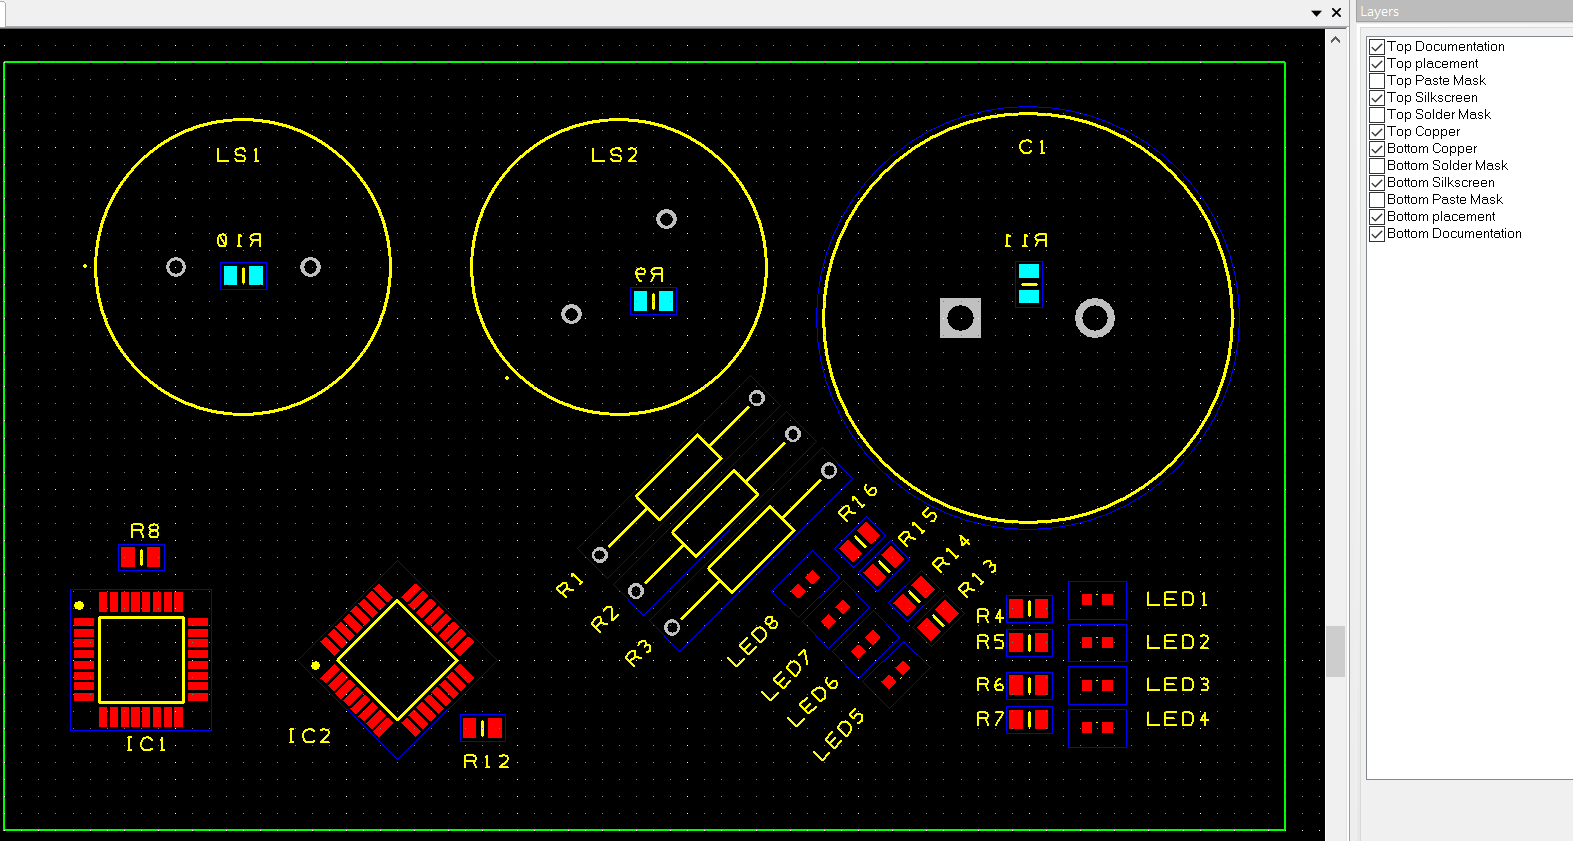 Placement_PCB_1.png